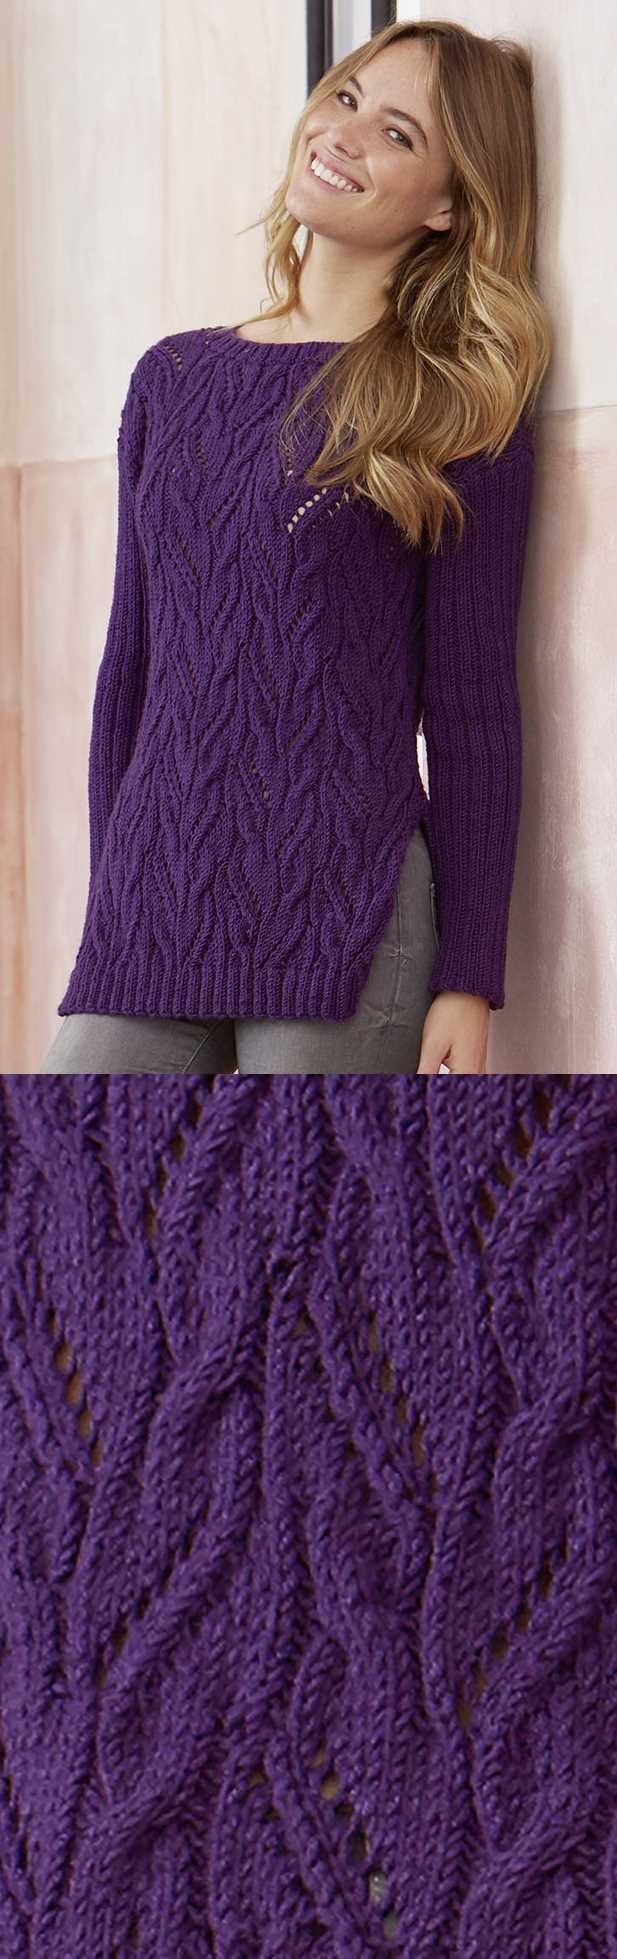 Free Knitting Pattern for a Lace and Cable Pullover